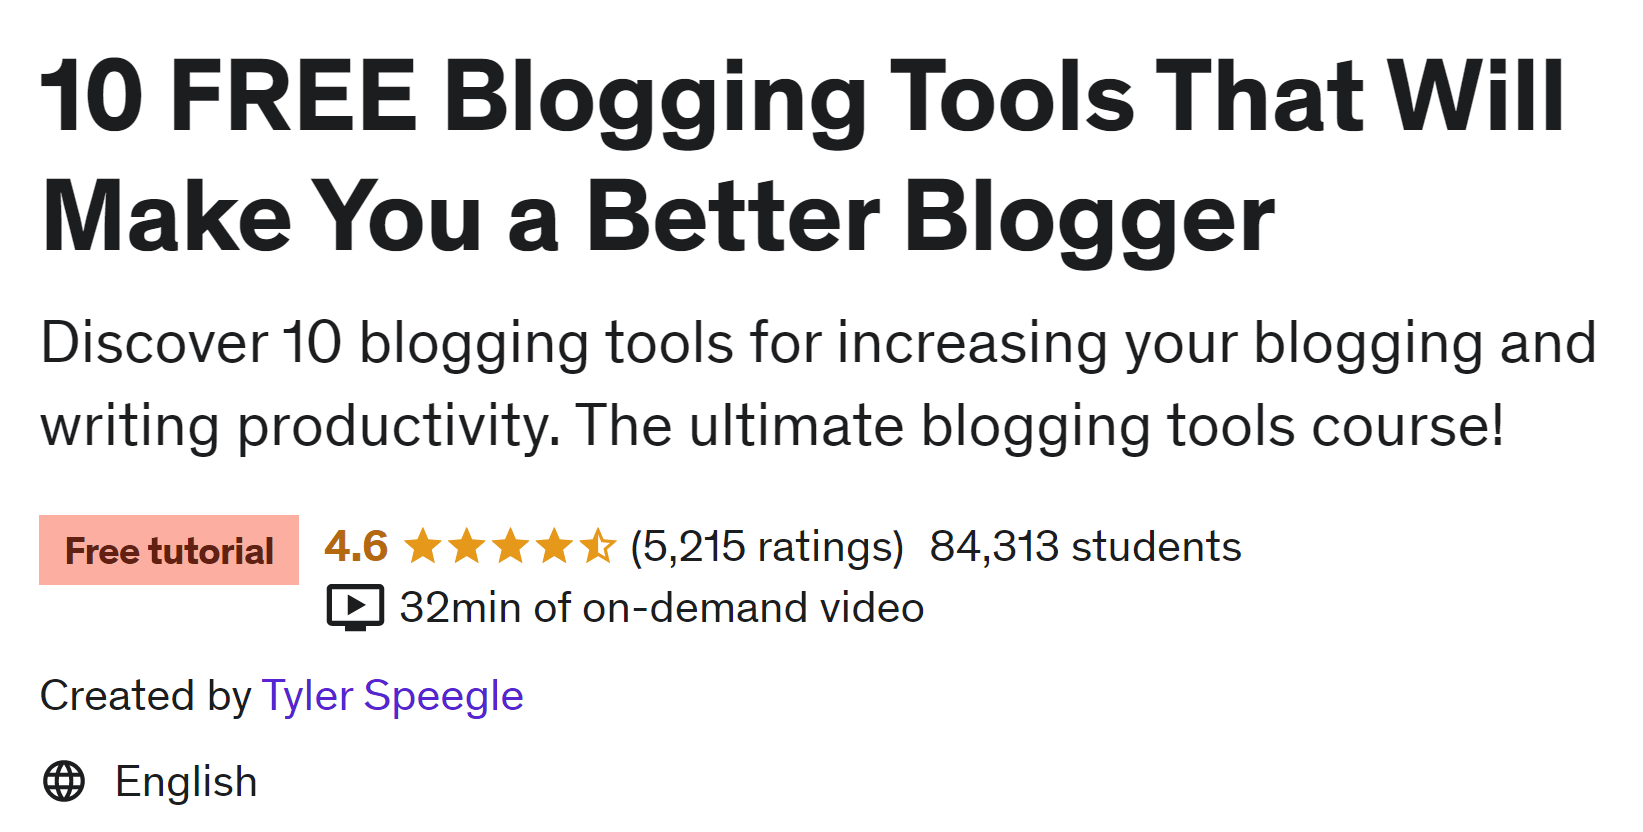 Udemy's 10 Free Blogging Tools course